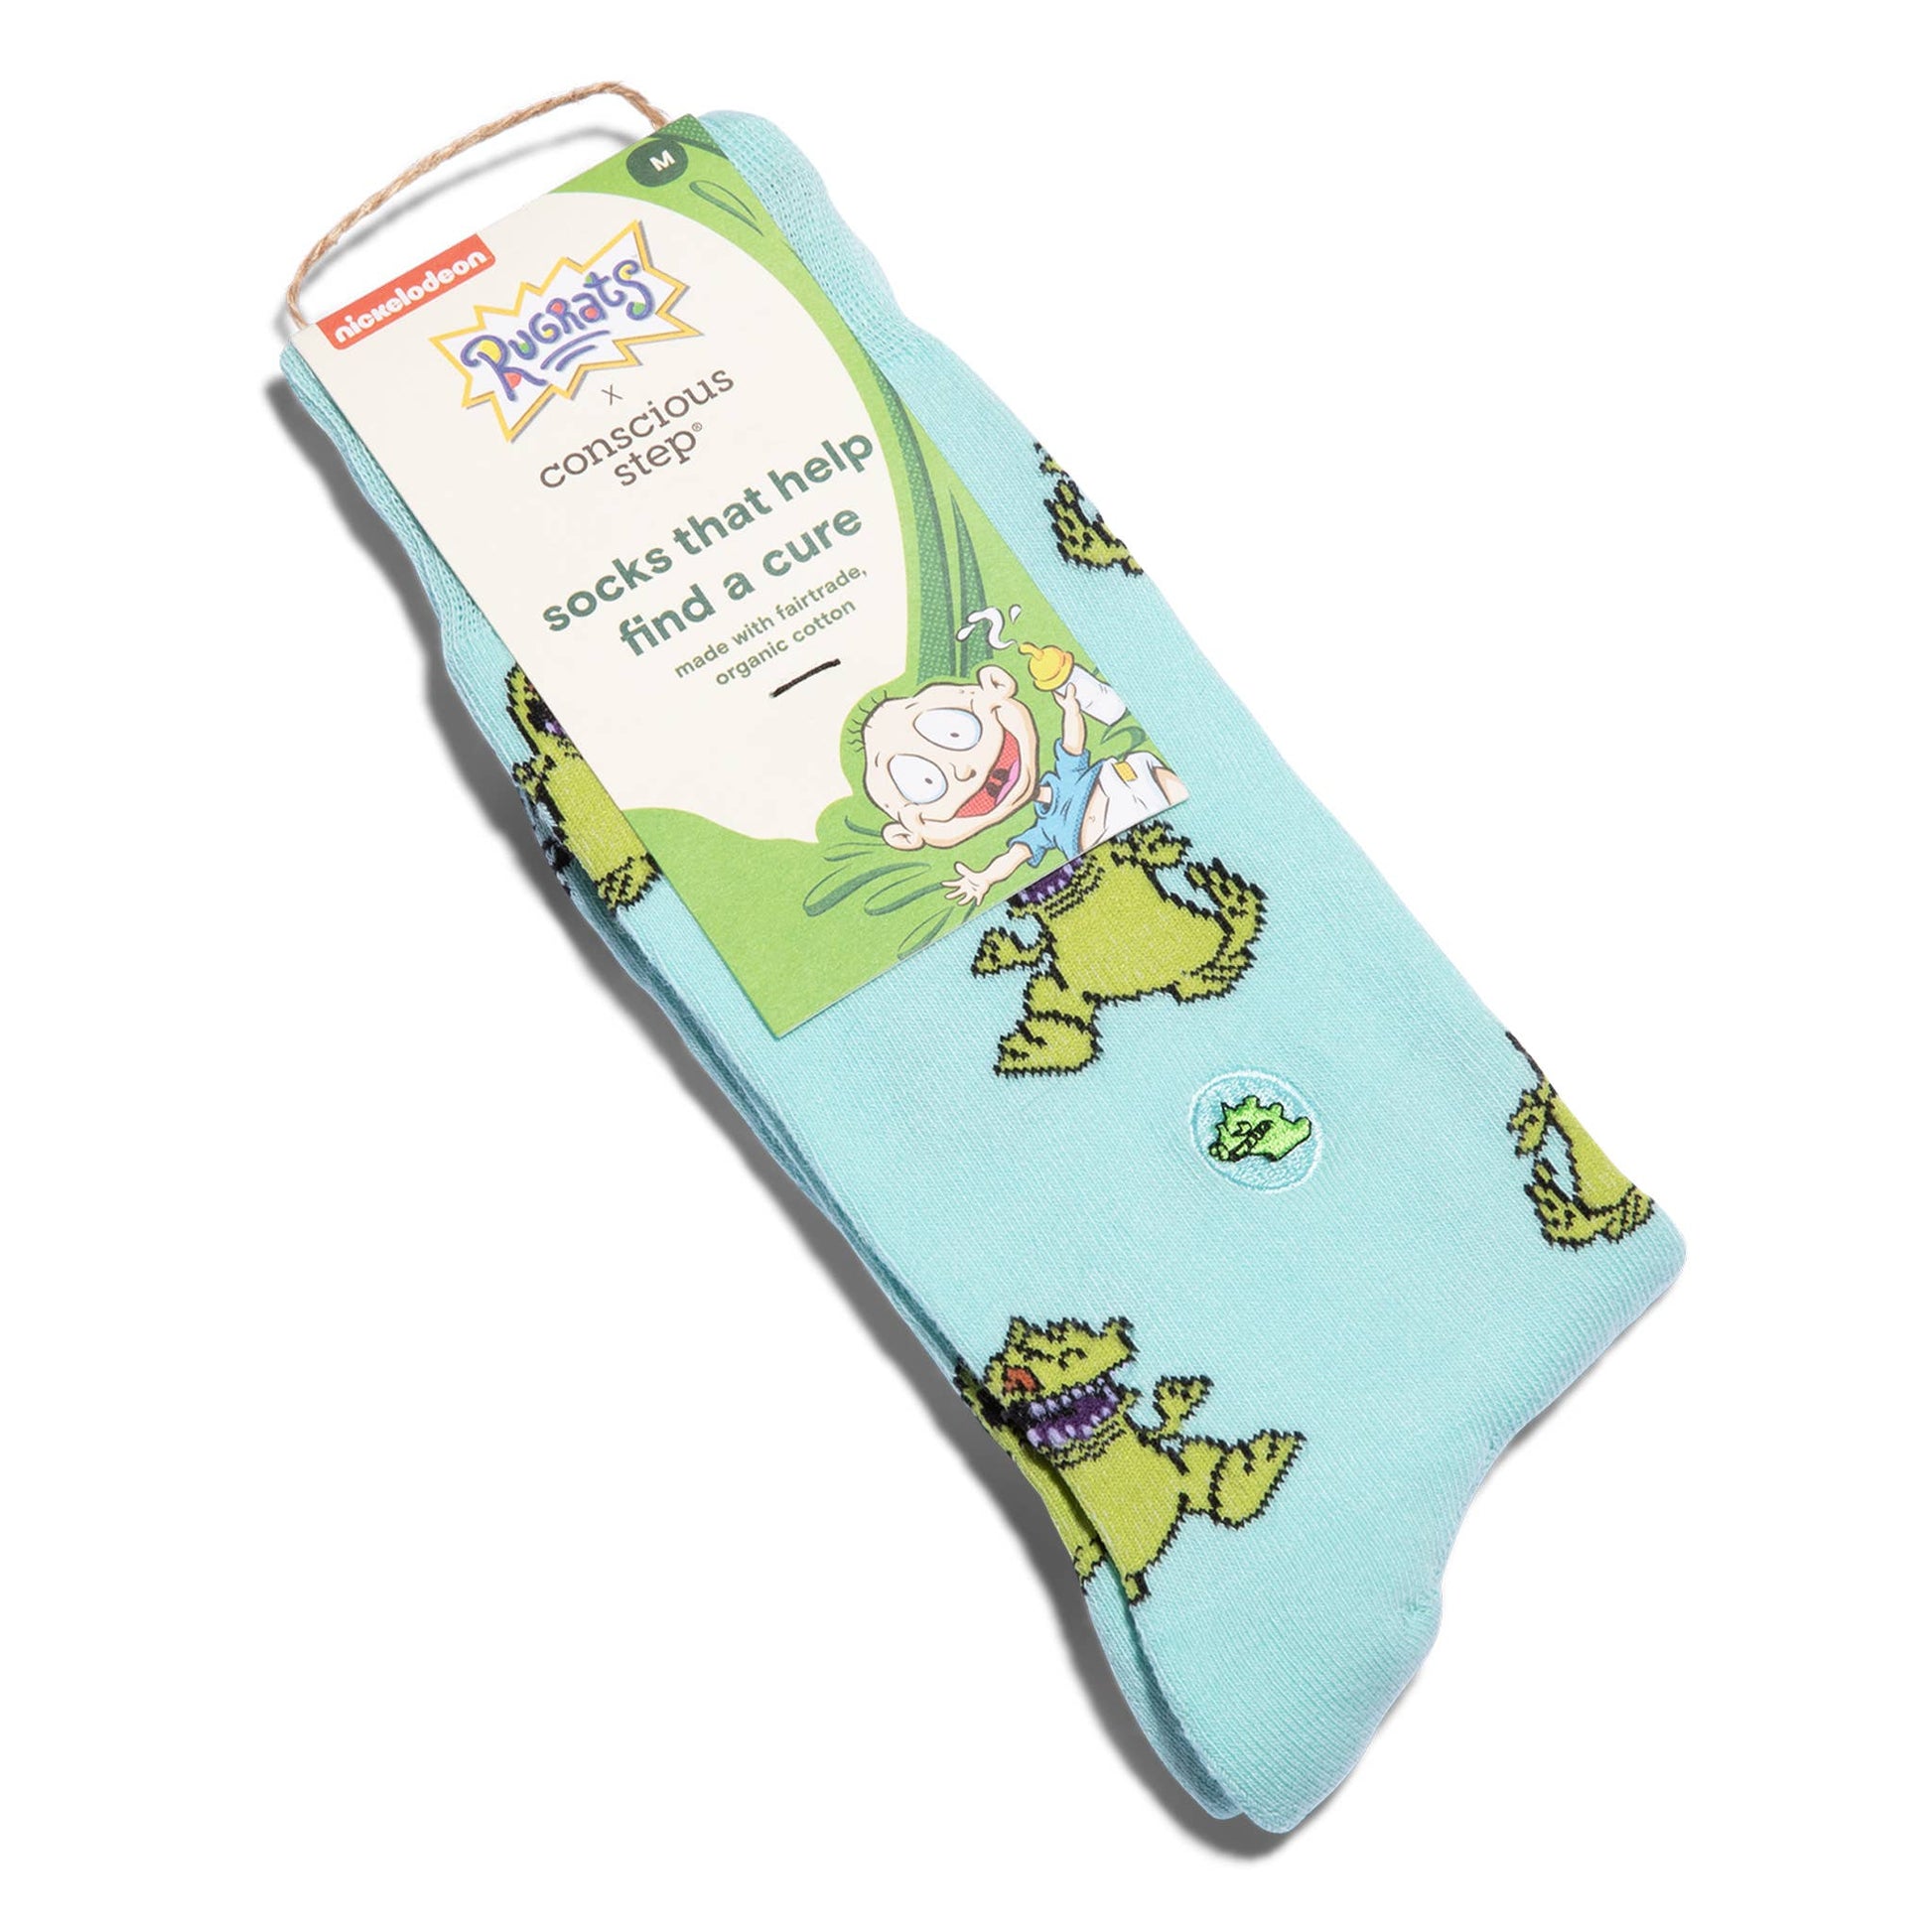 Conscious Step - Rugrats Socks that Find a Cure (Blue Reptars)  Conscious Step   -better made easy-eco-friendly-sustainable-gifting